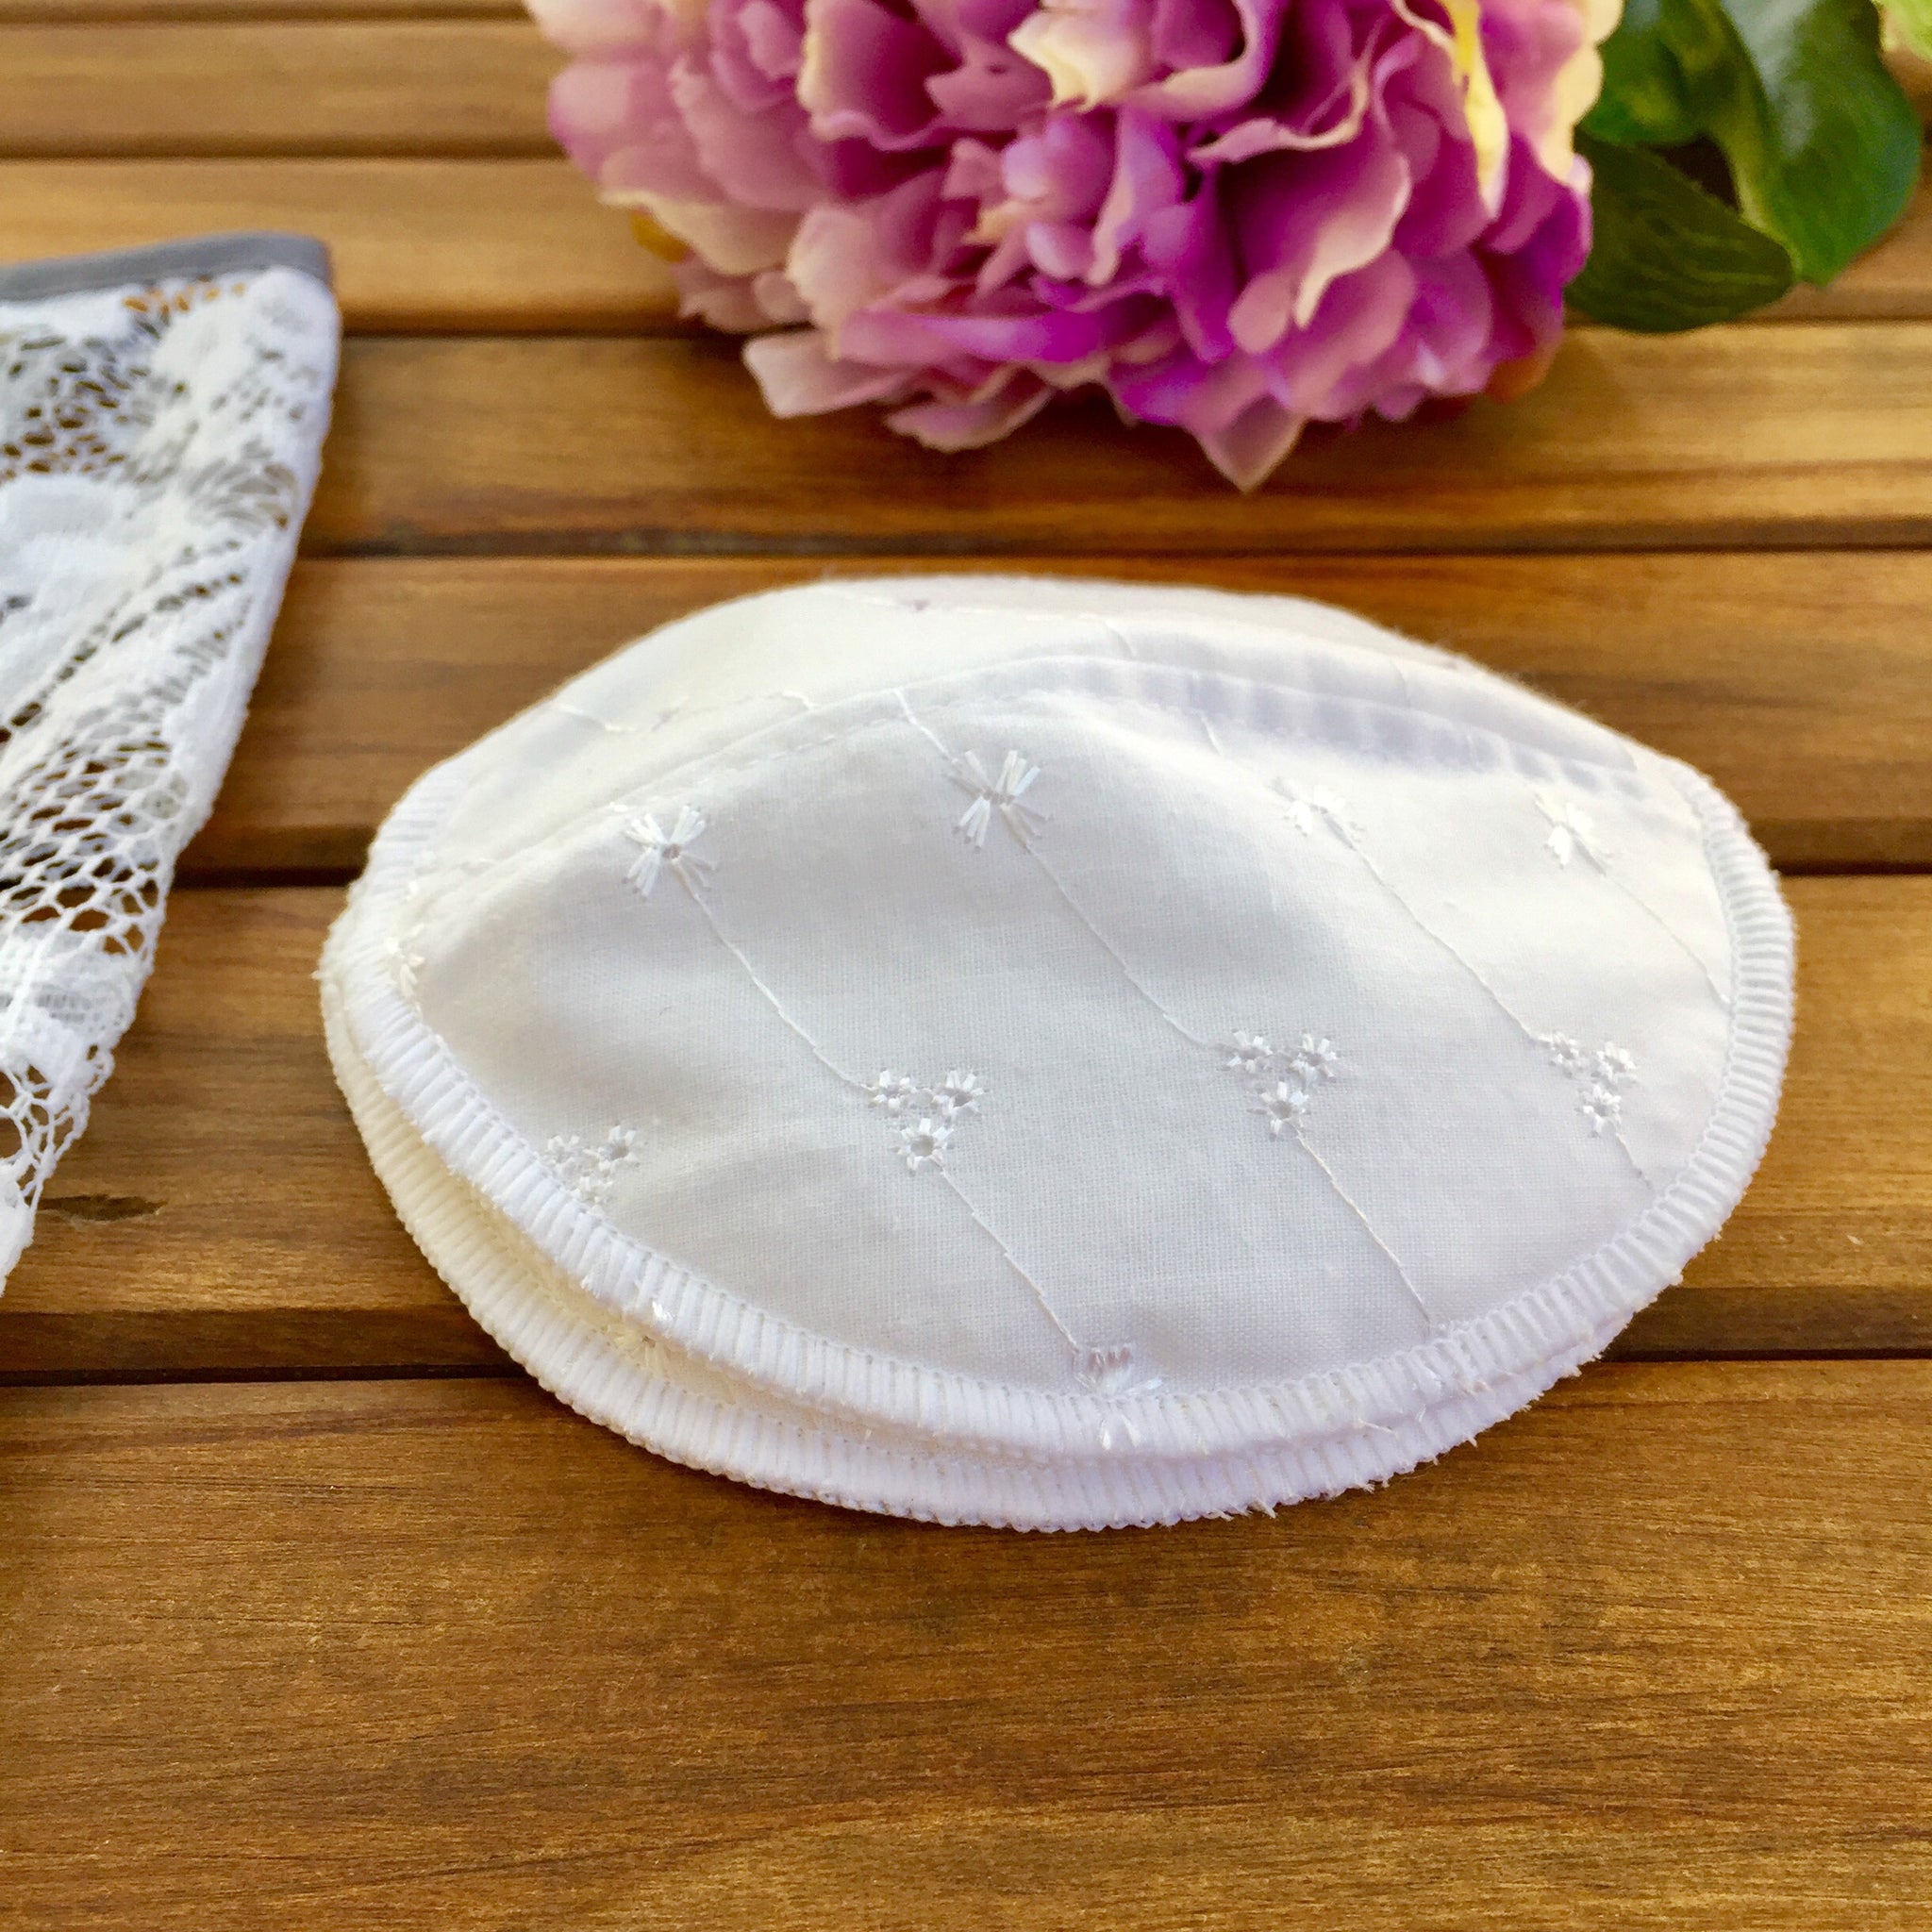 Reusable and Contoured Breast Pads – Kalm Designs